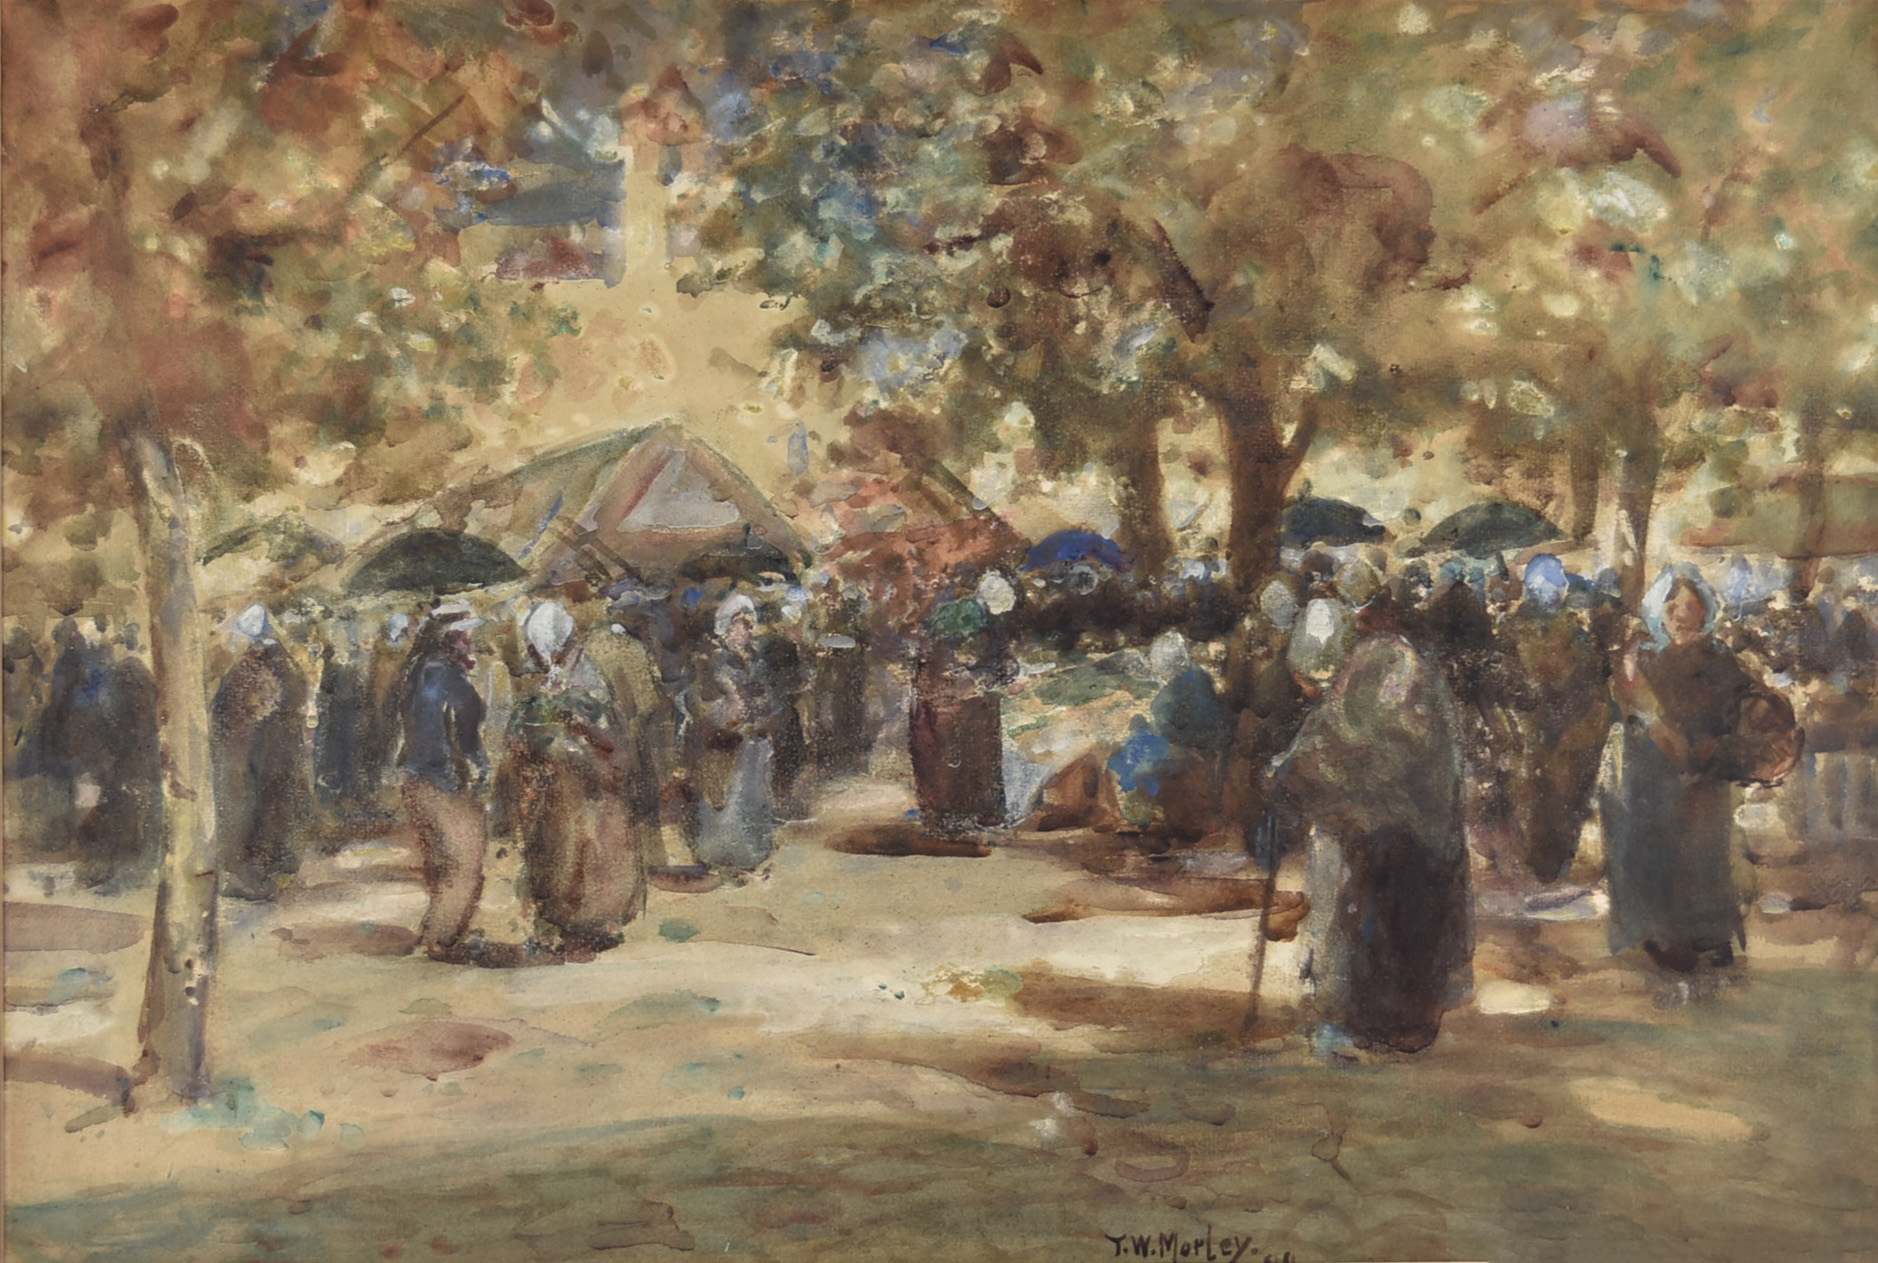 Thomas William Morley (1859-1925) watercolour on paper, French Market Scene', signed 'T.W.Morley' (